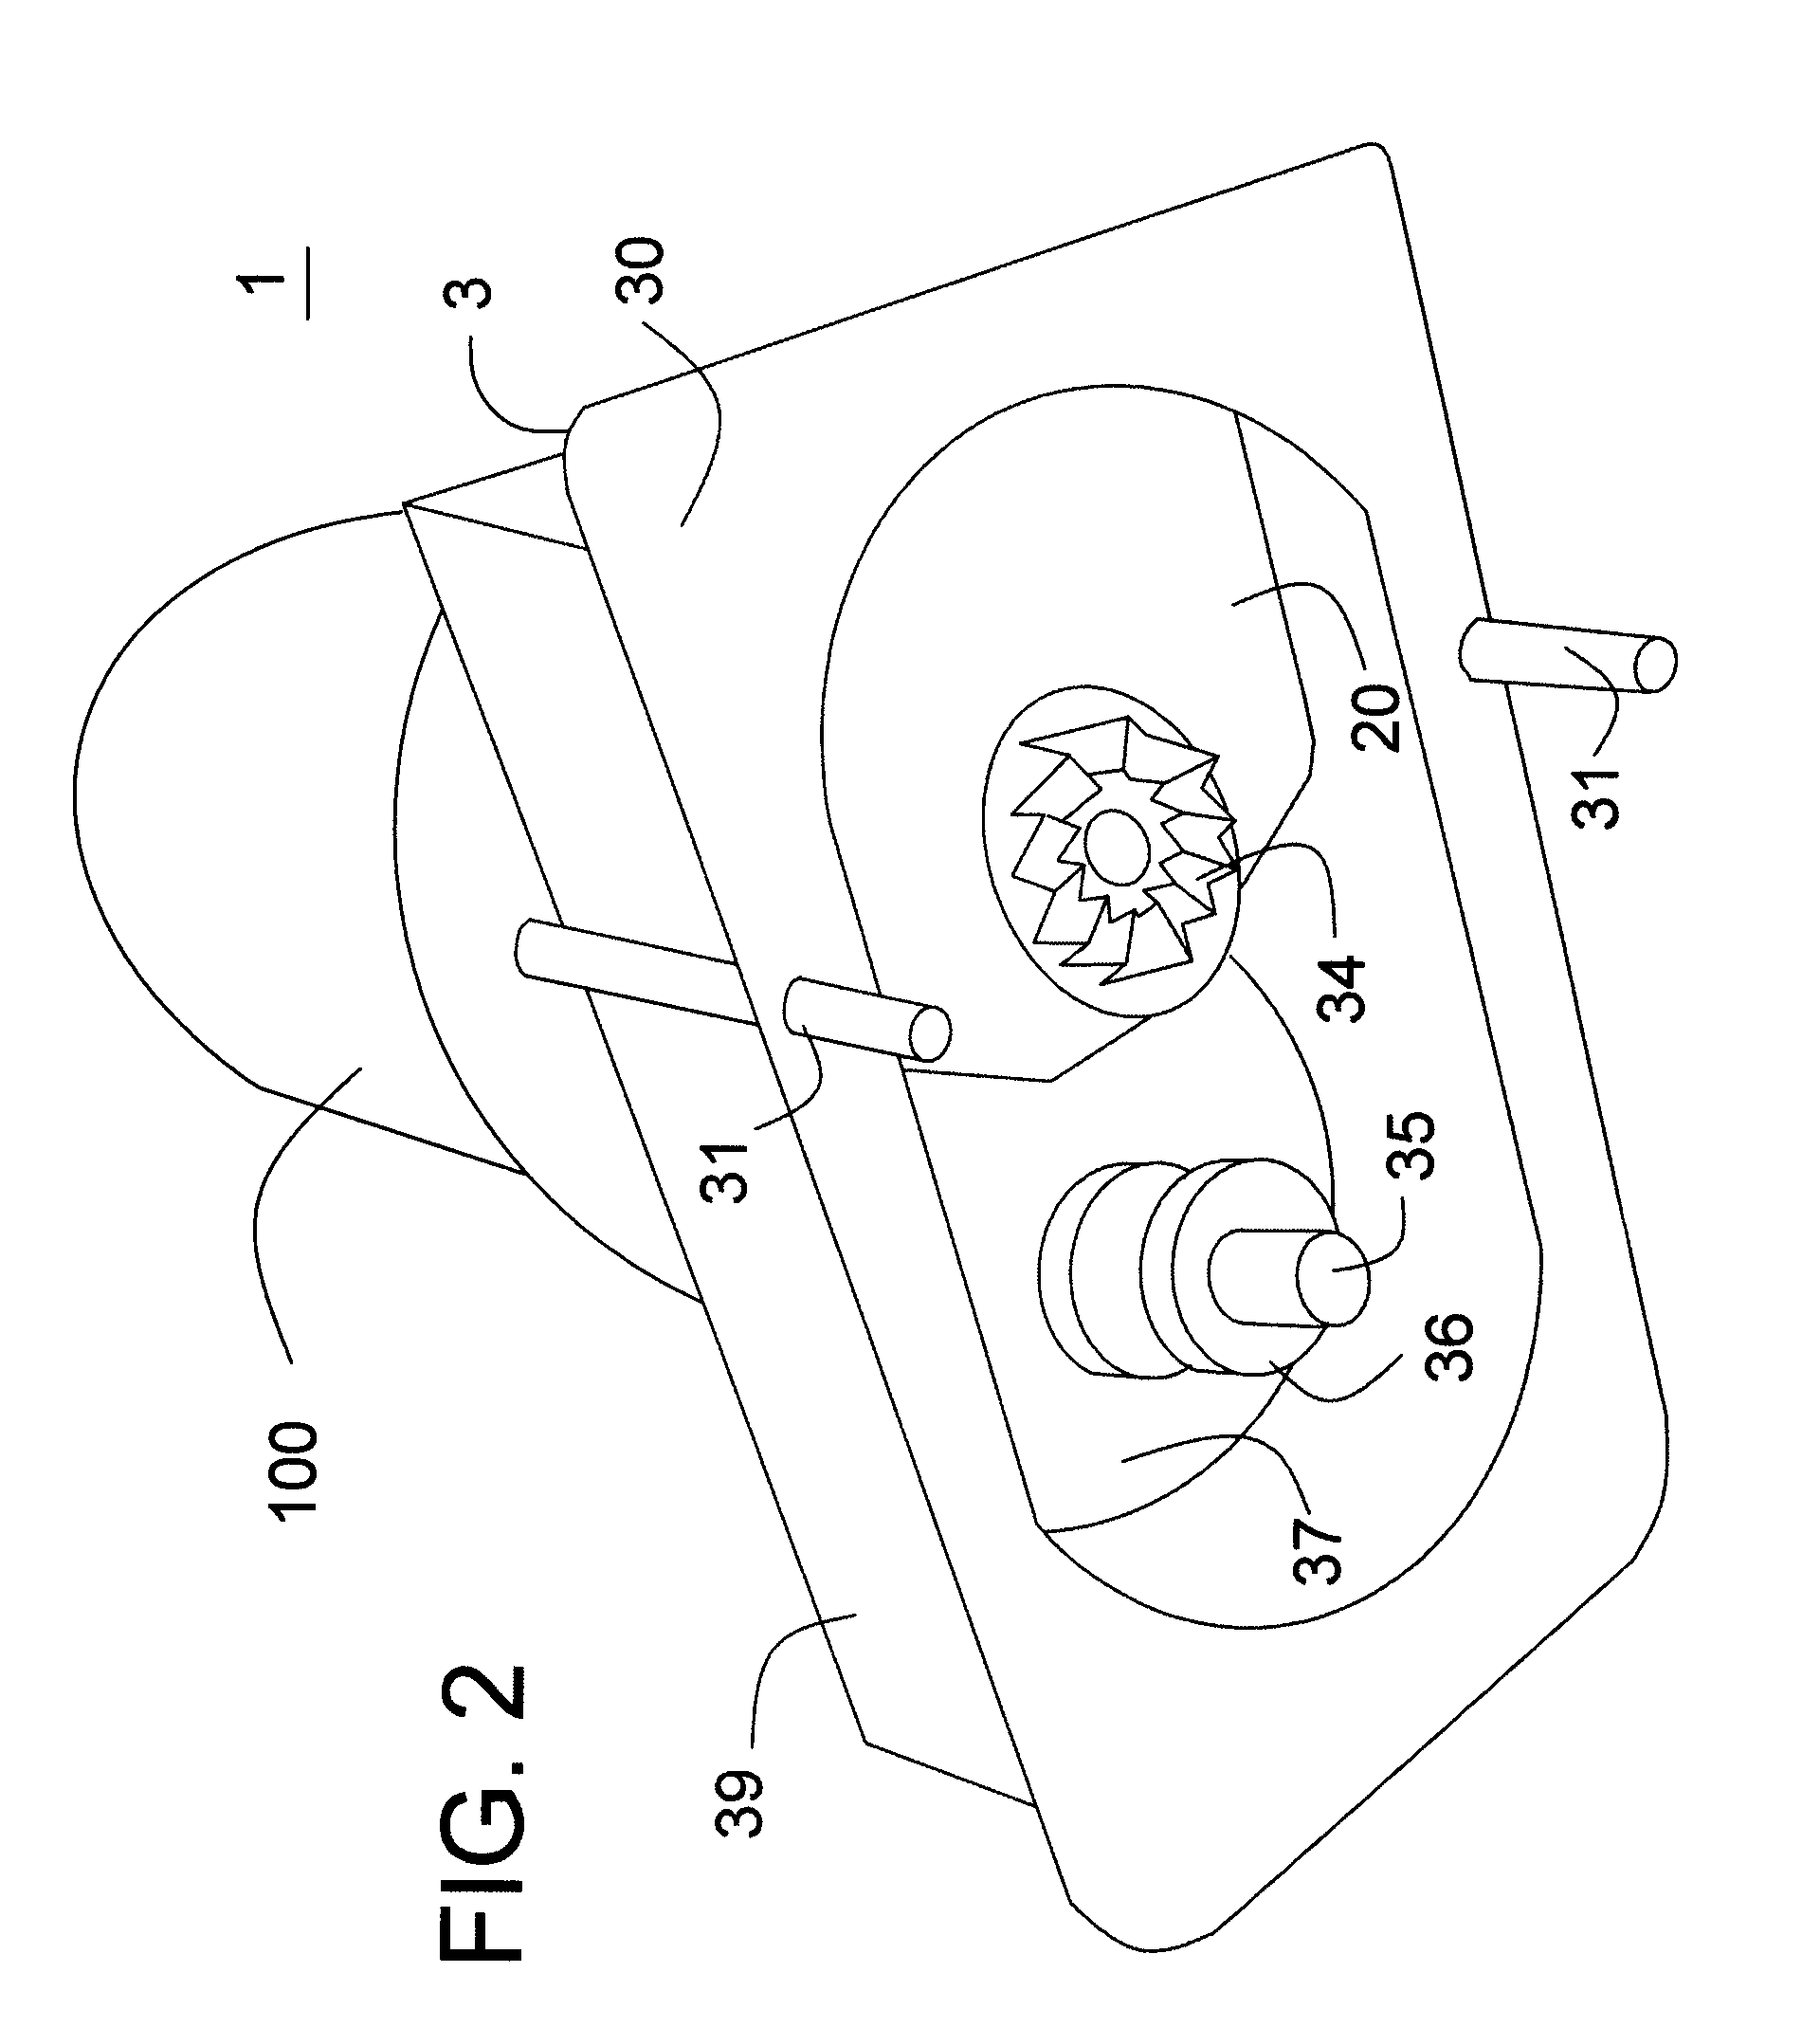 Apparatus for cleaning floor surfaces